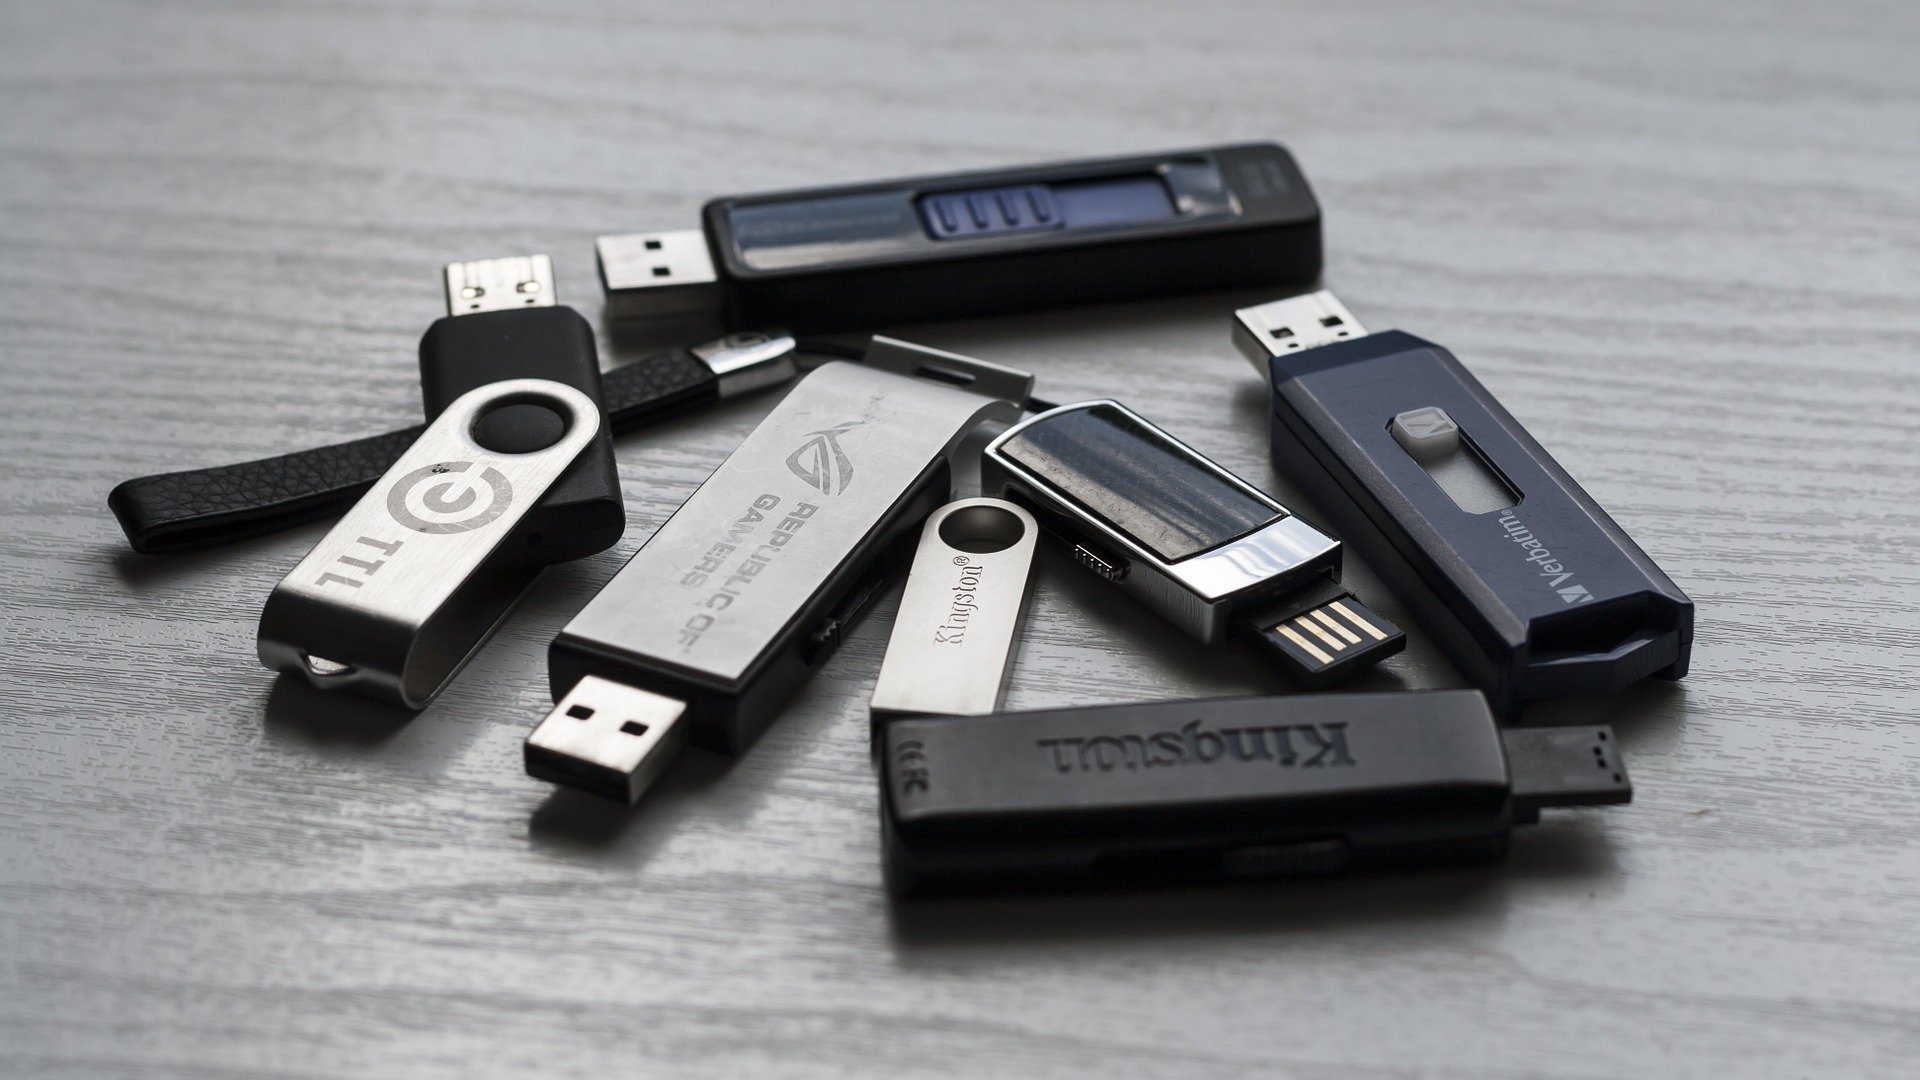 Researchers recover 75,000 'deleted' files from pre-owned USB drives